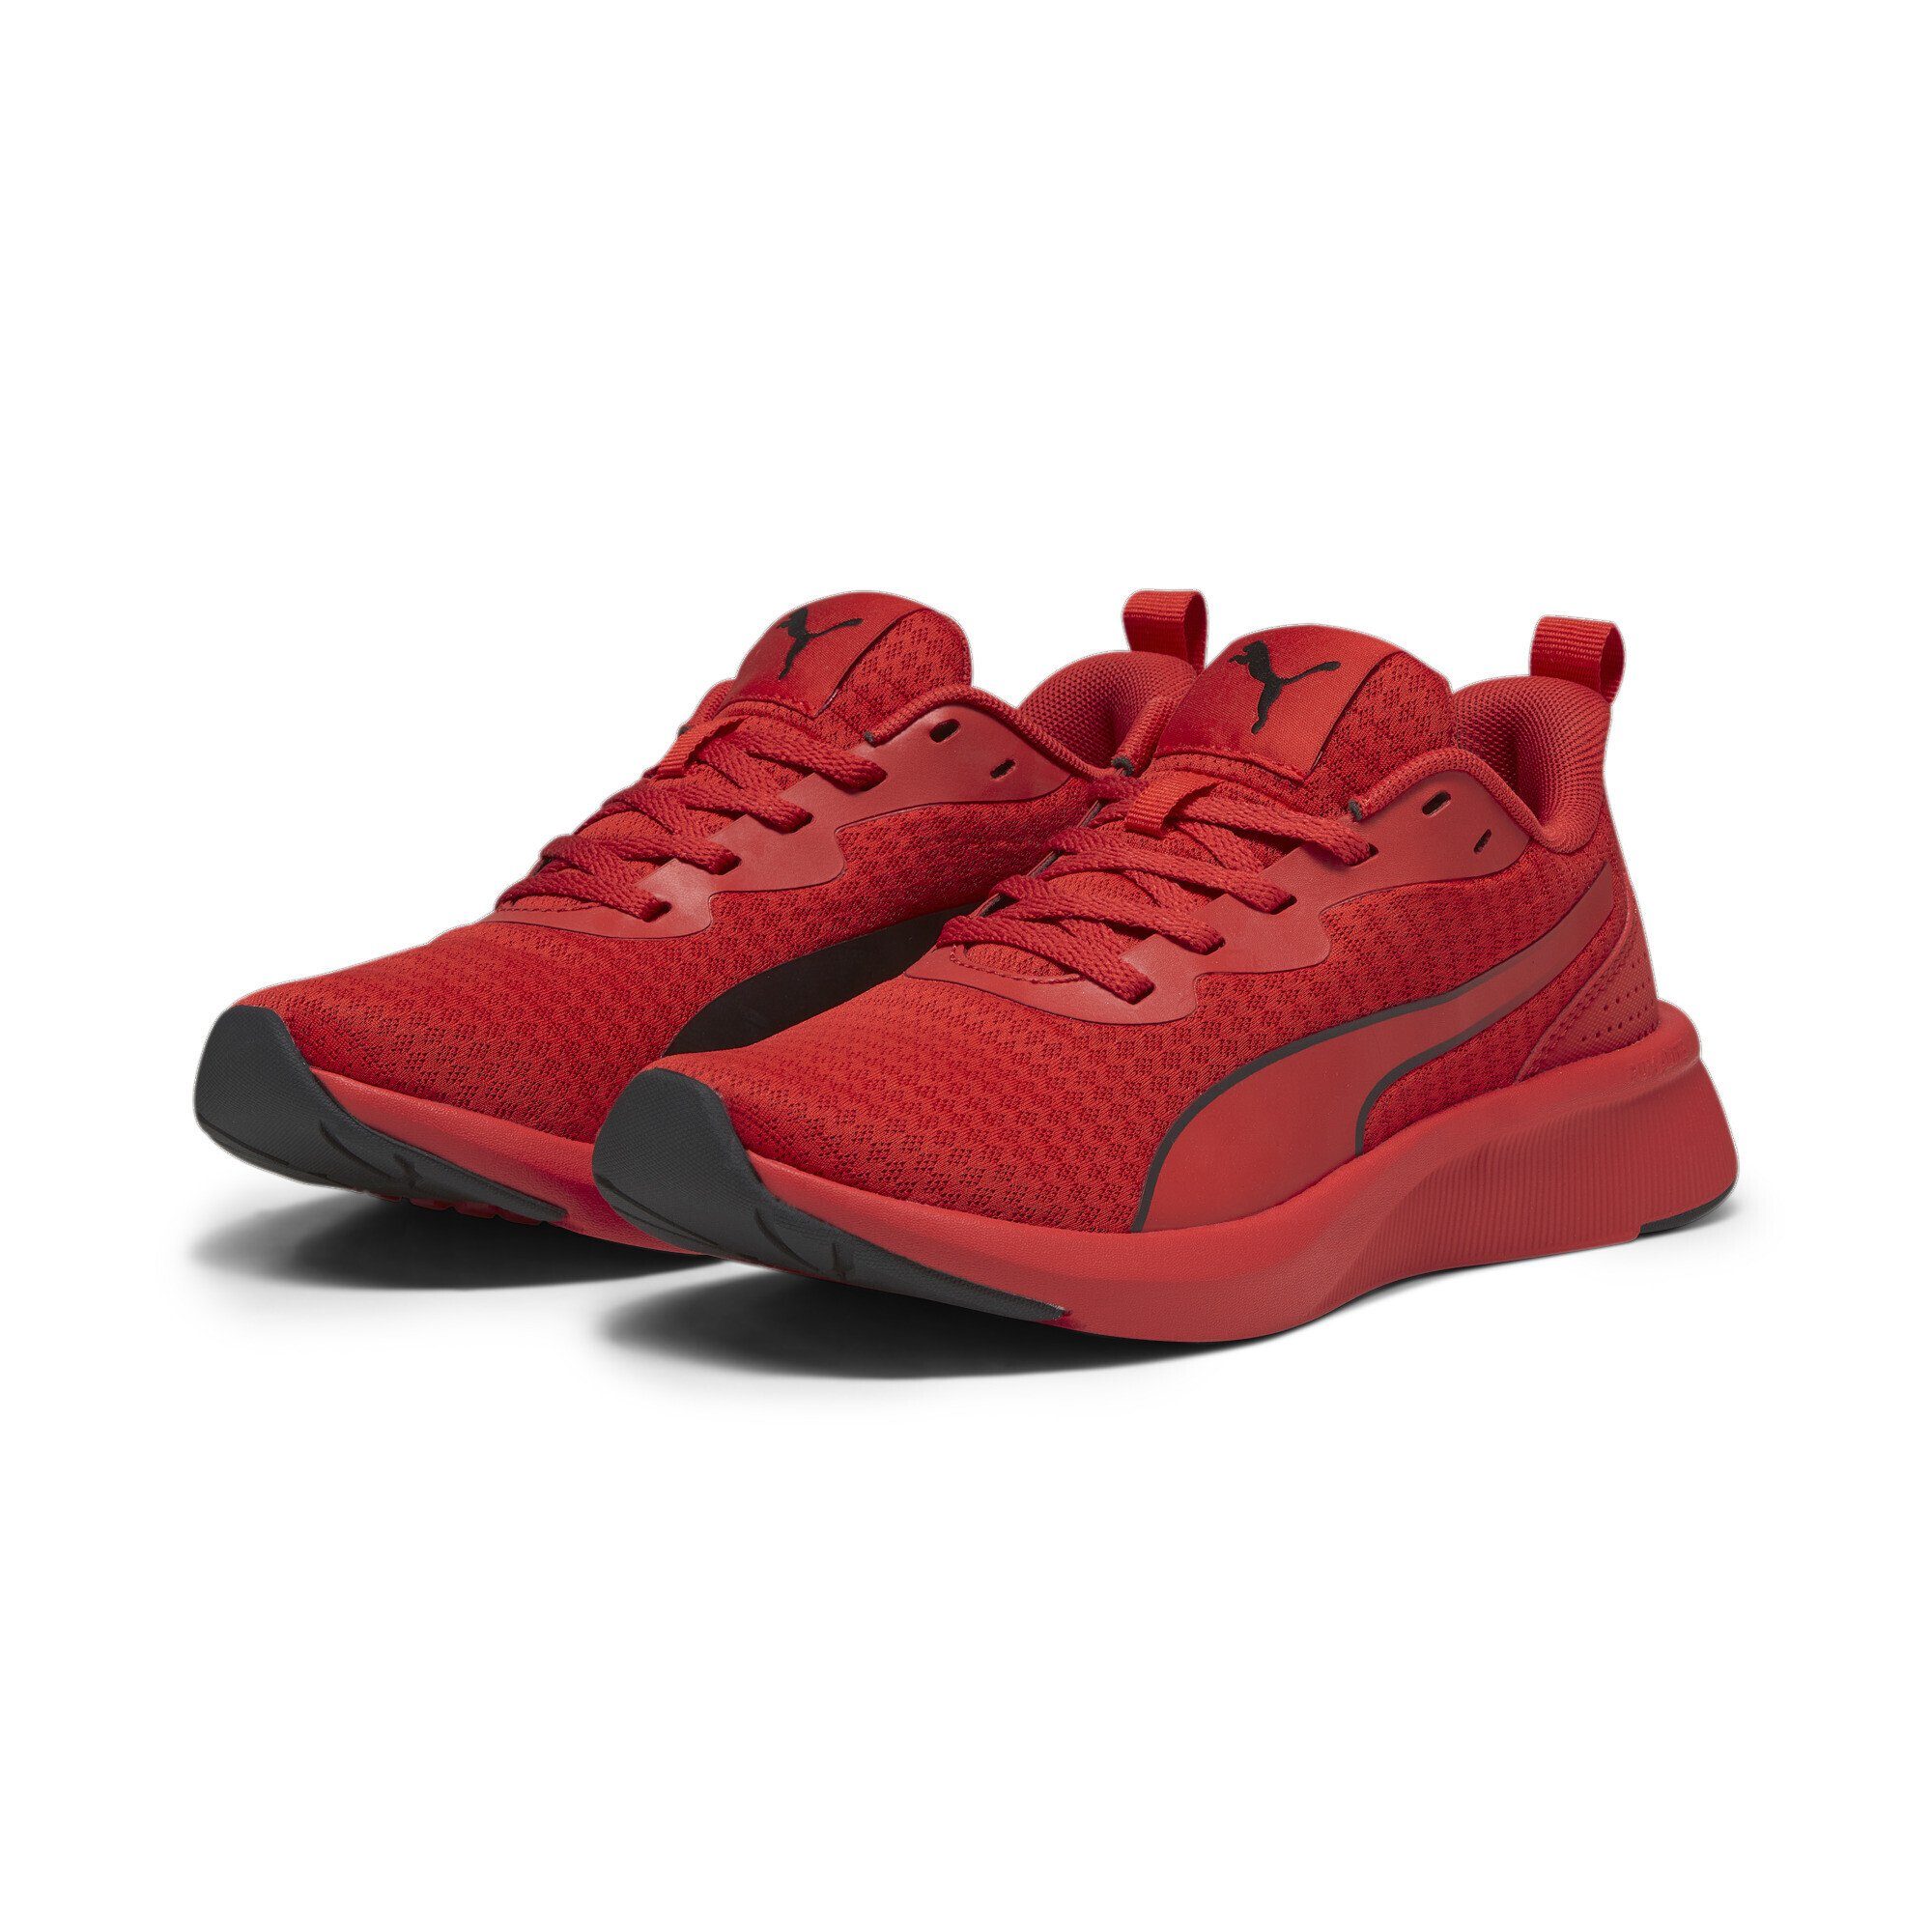 PUMA Flyer Lite Sneakers Jugendliche Trainingsschuh For All Time Red Black